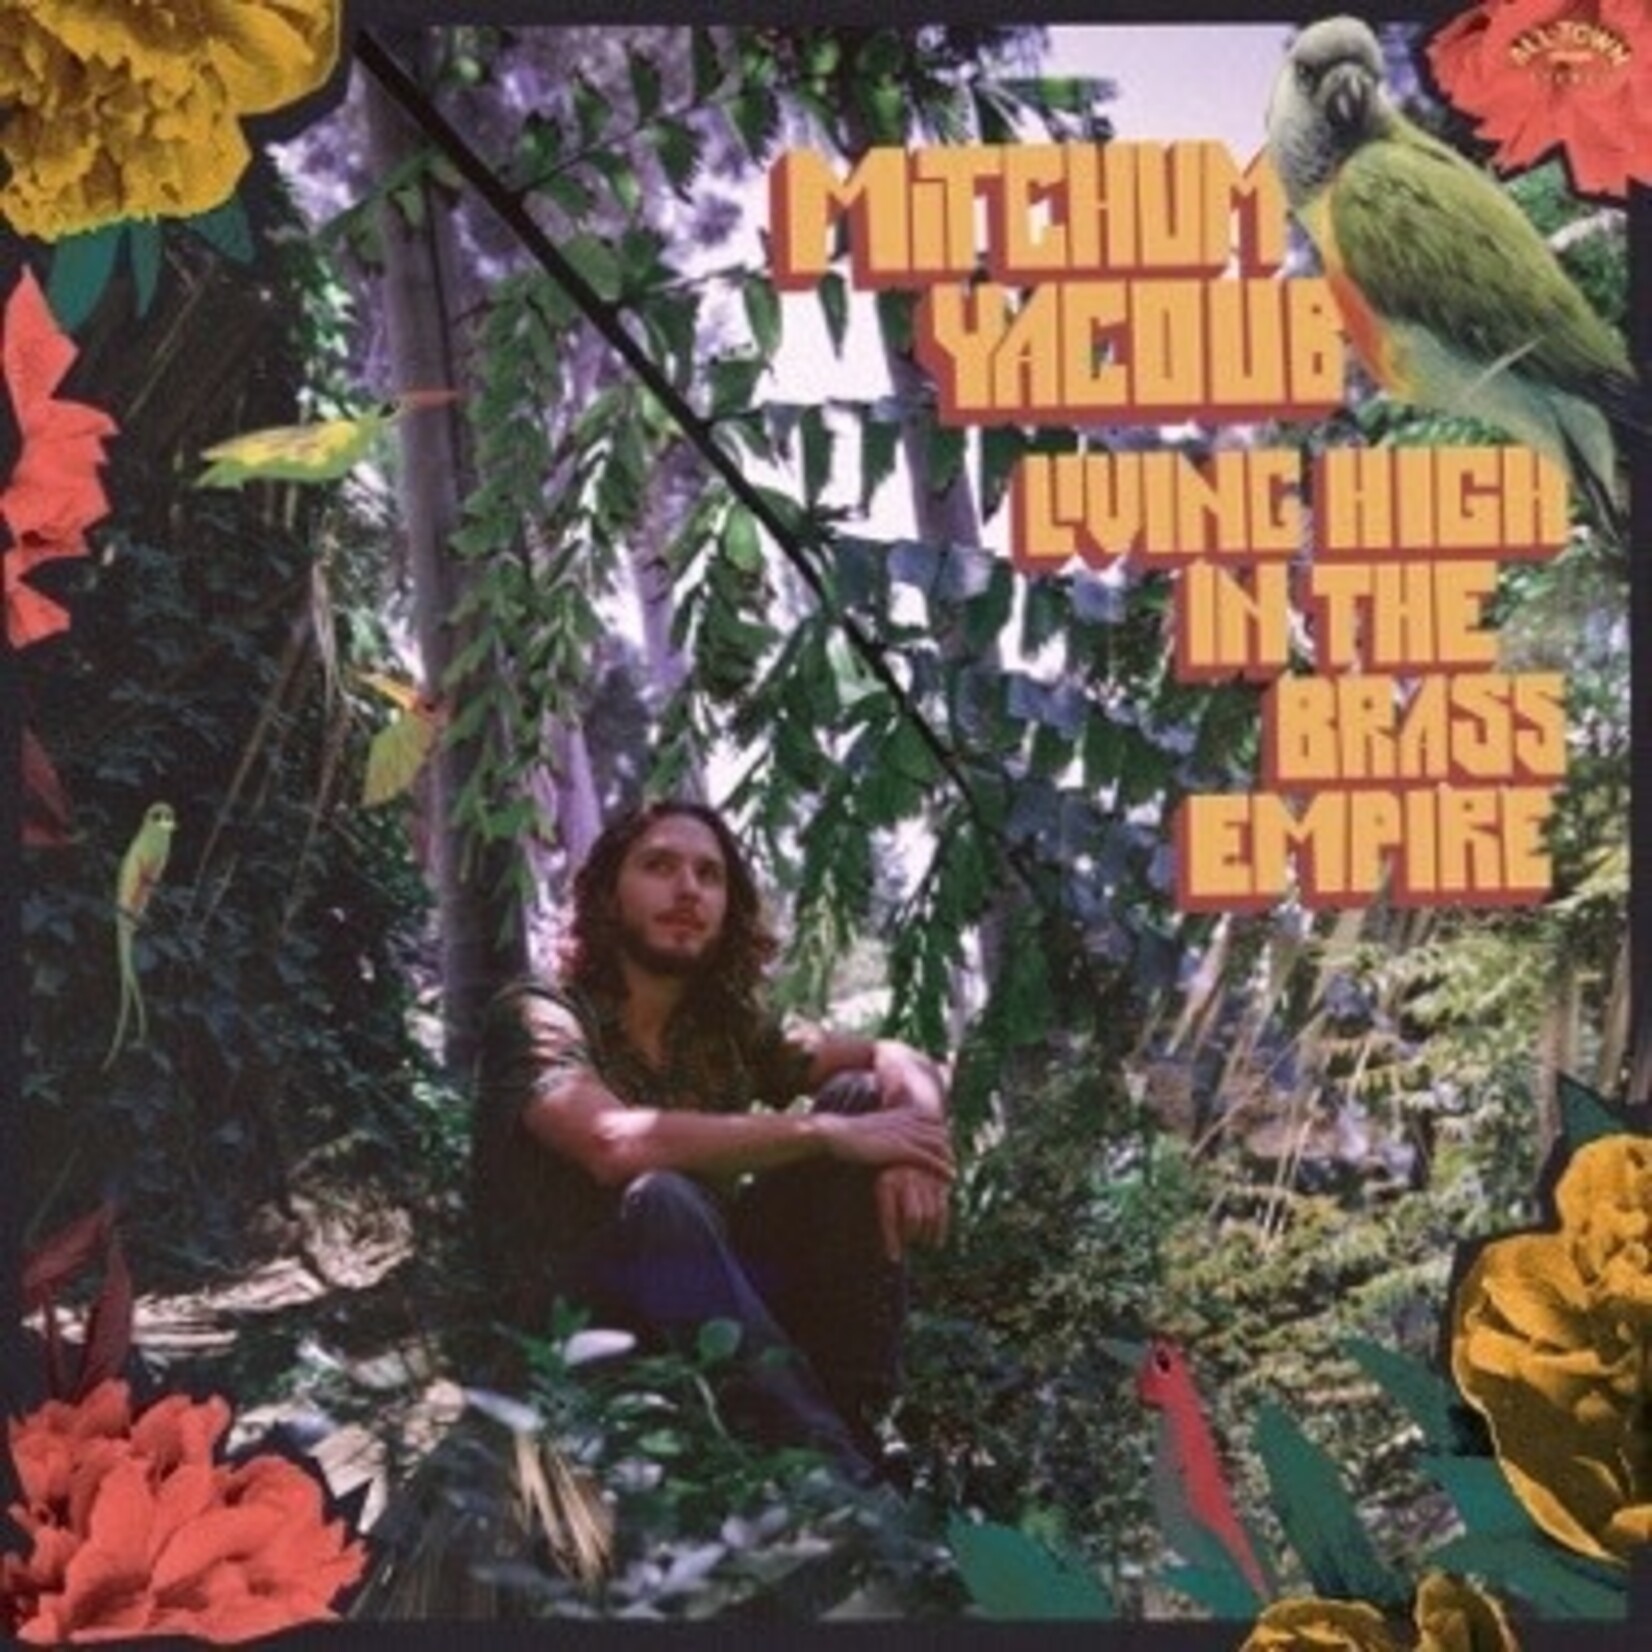 Colemine Mitchum Yacoub - Living High in the Brass Empire (LP) [Orange]